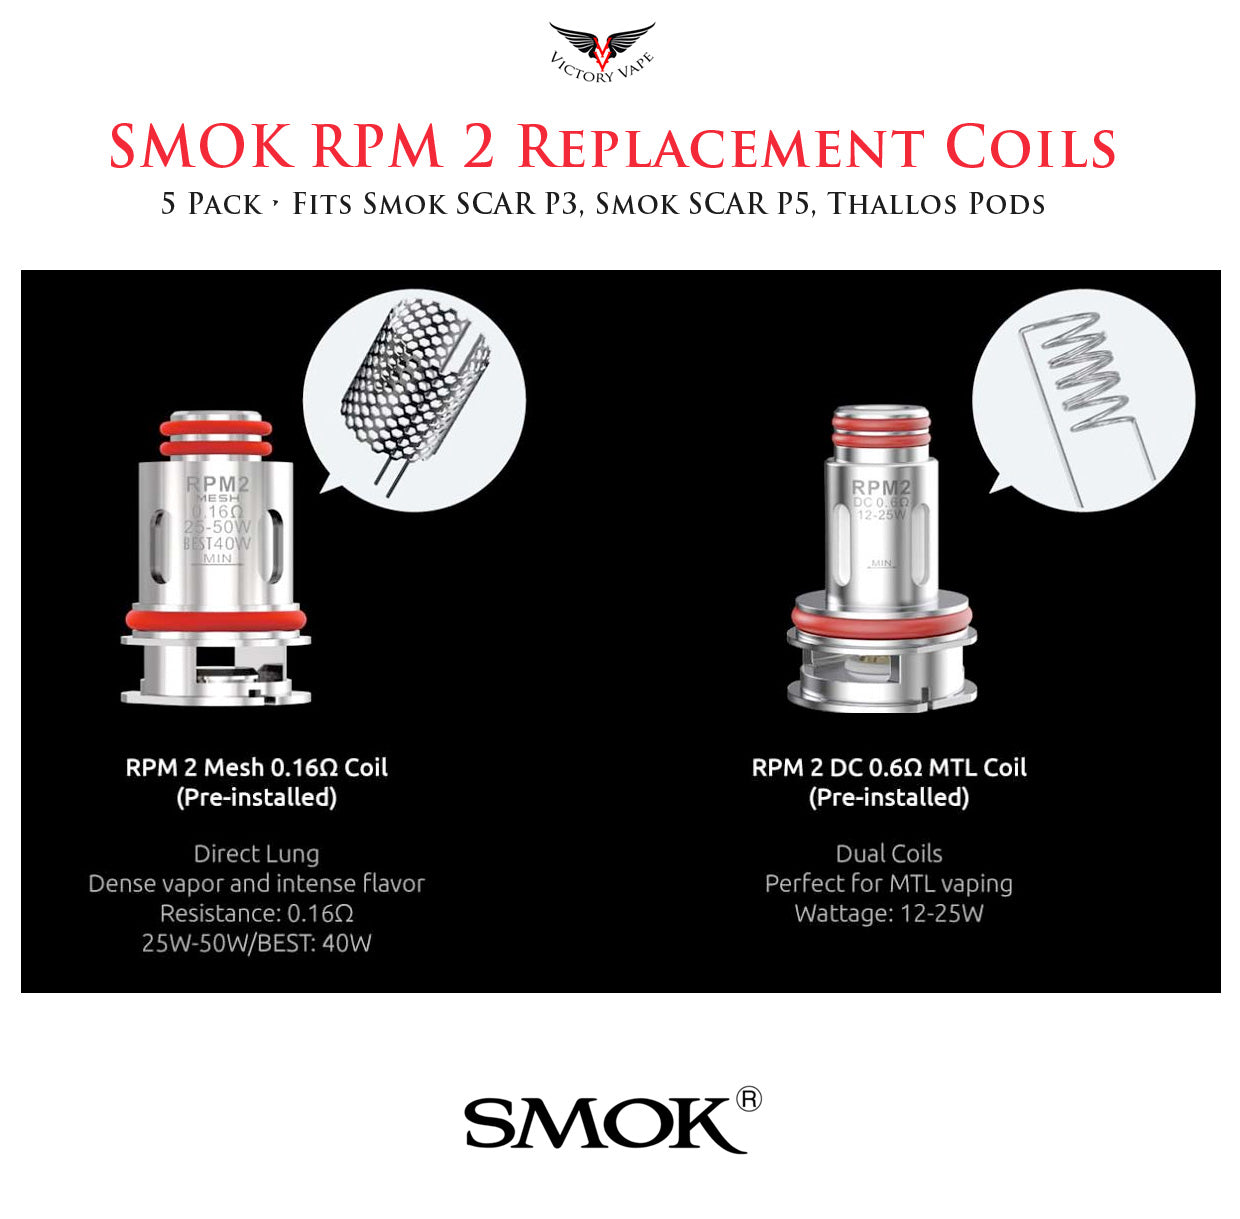  SMOK RPM 2 Replacement Coils  • 5 Pack 